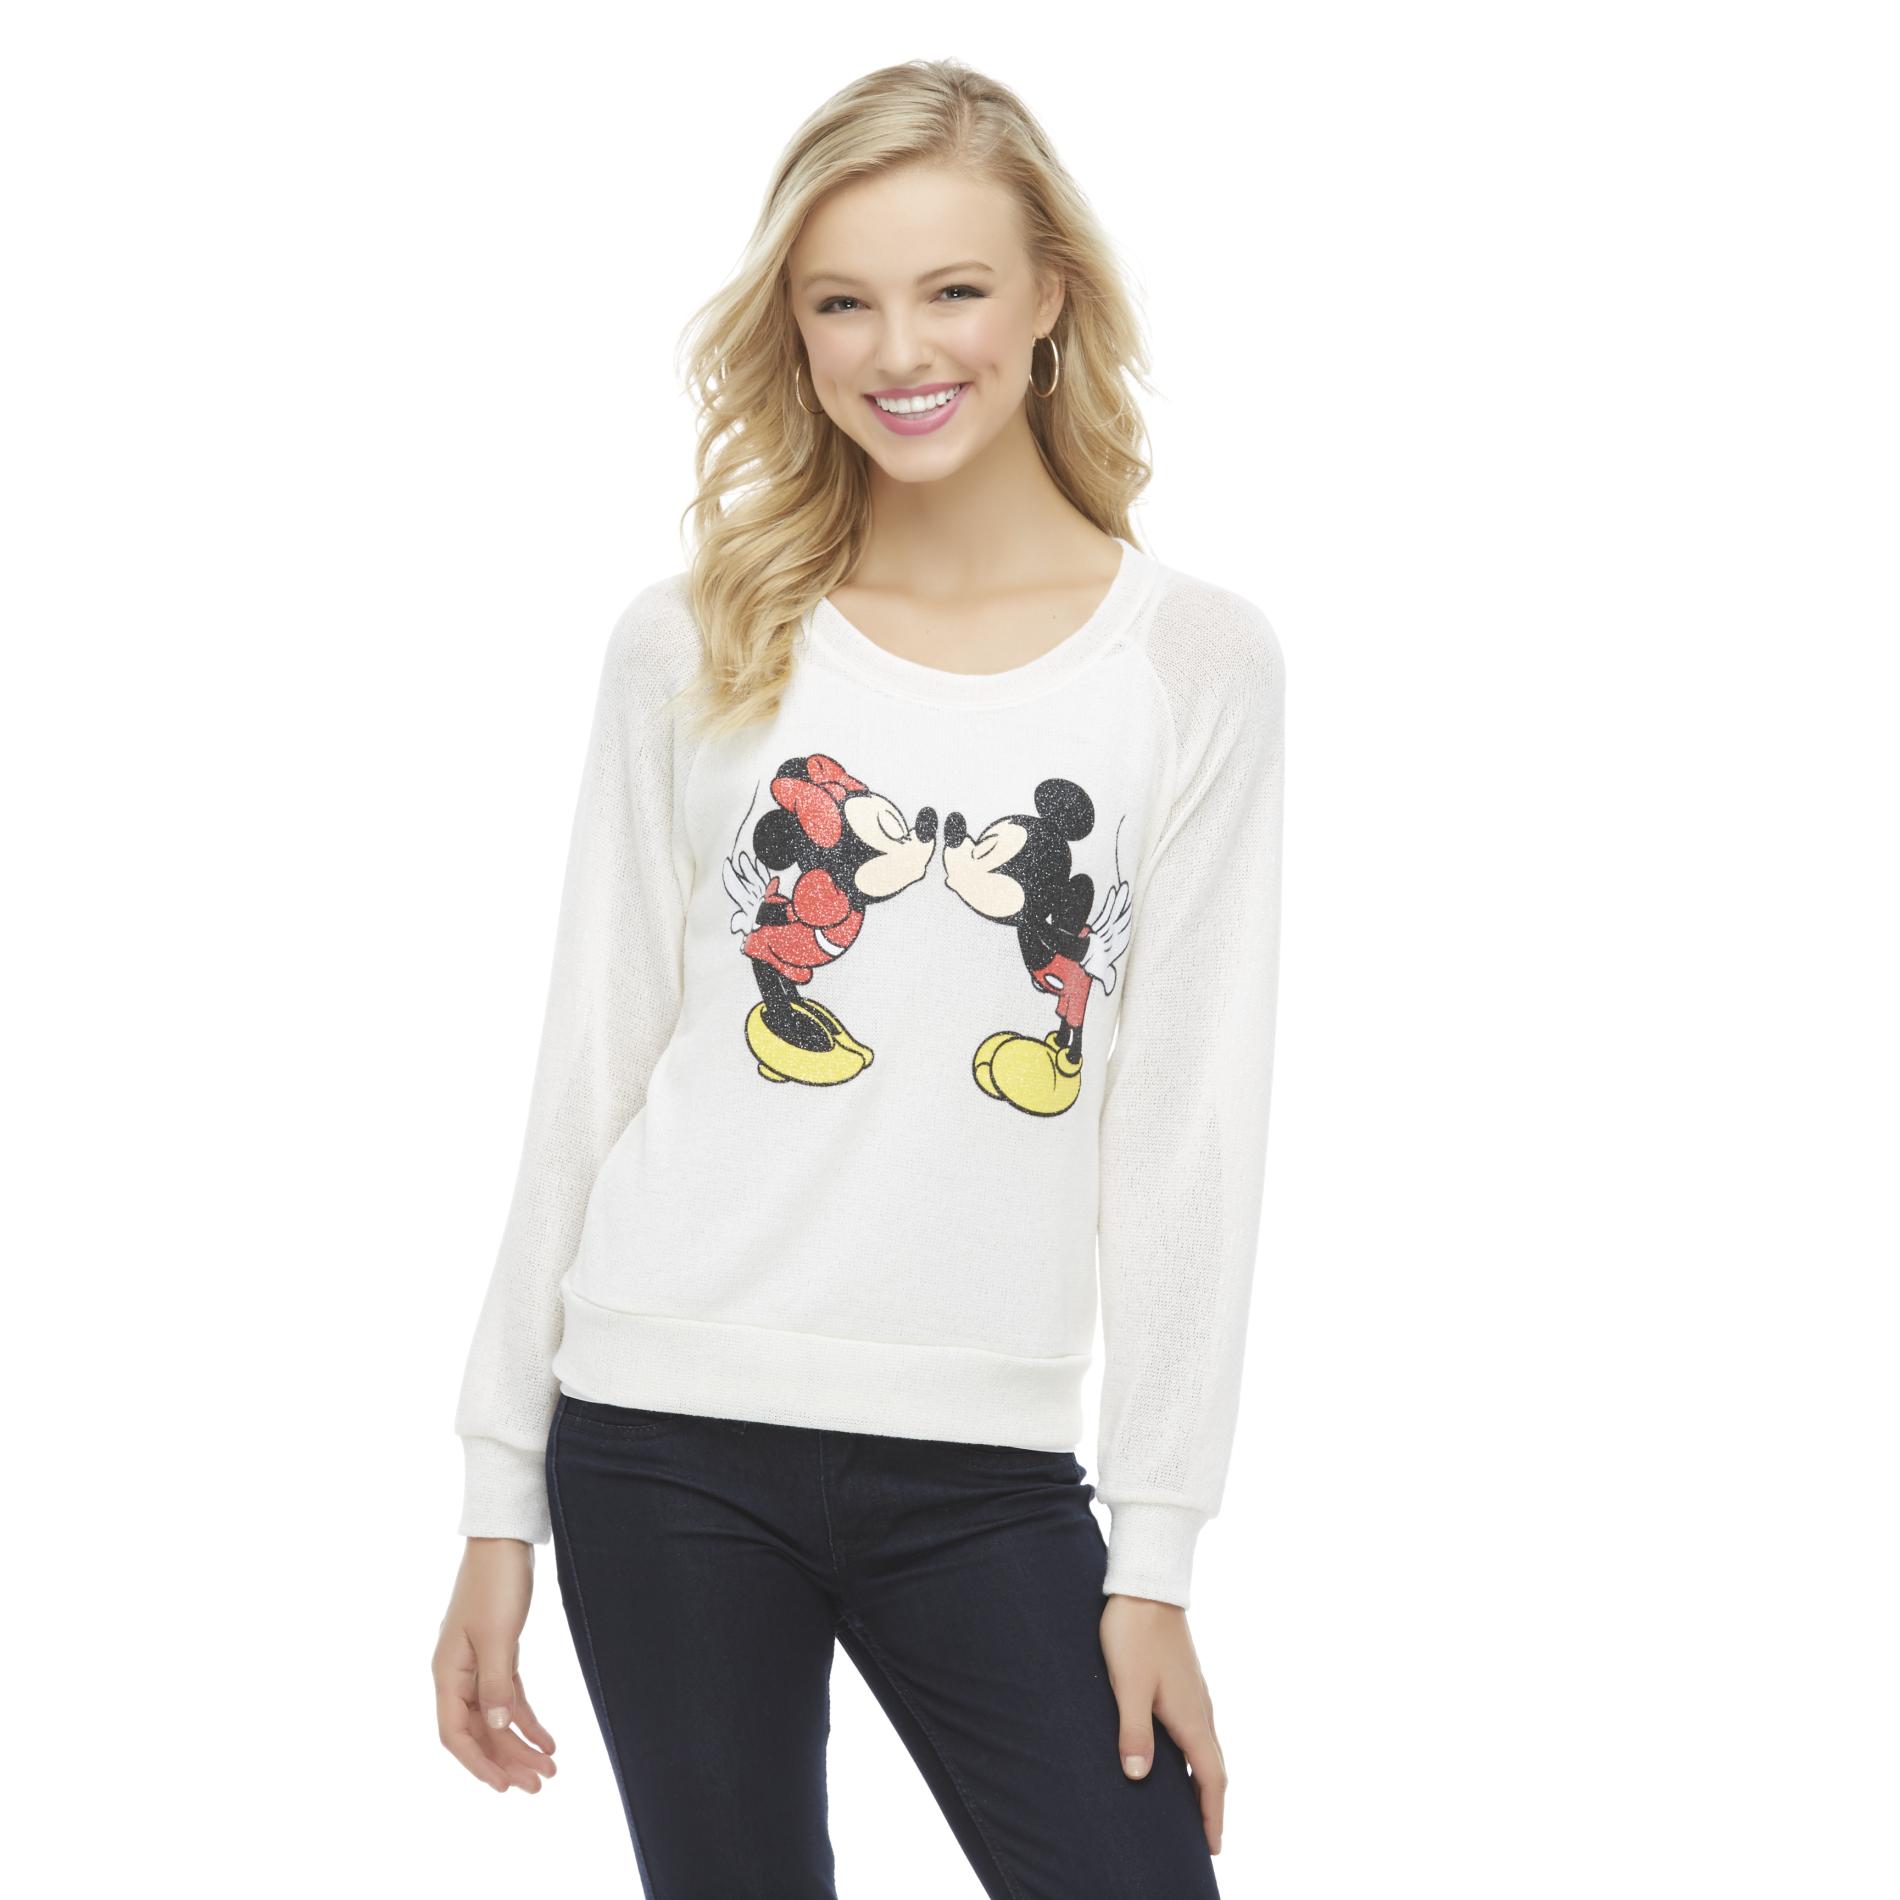 Disney Minnie Mouse & Mickey Mouse Junior's Novelty Sweater